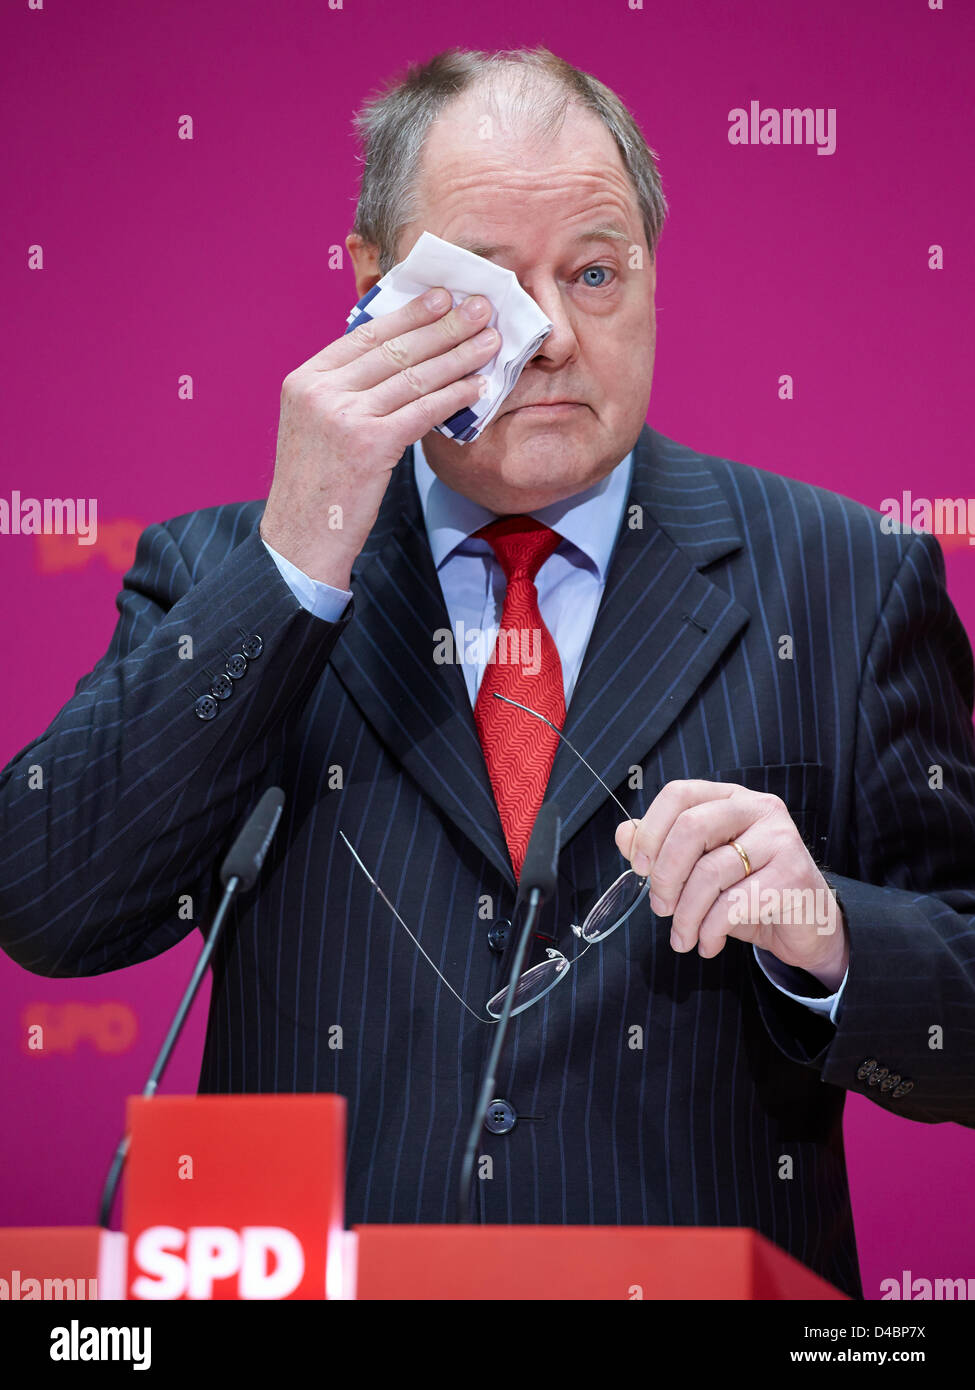 Berlin, Germany. 11th March, 2013. Peer Steinbrueck, Chancellor candidate of SPD, and SPD Chairman, Sigmar Gabriel, give a joint press confenrence in Berlin. On picture: Peer Steinbrueck, SPD chancellor candidate. Stock Photo